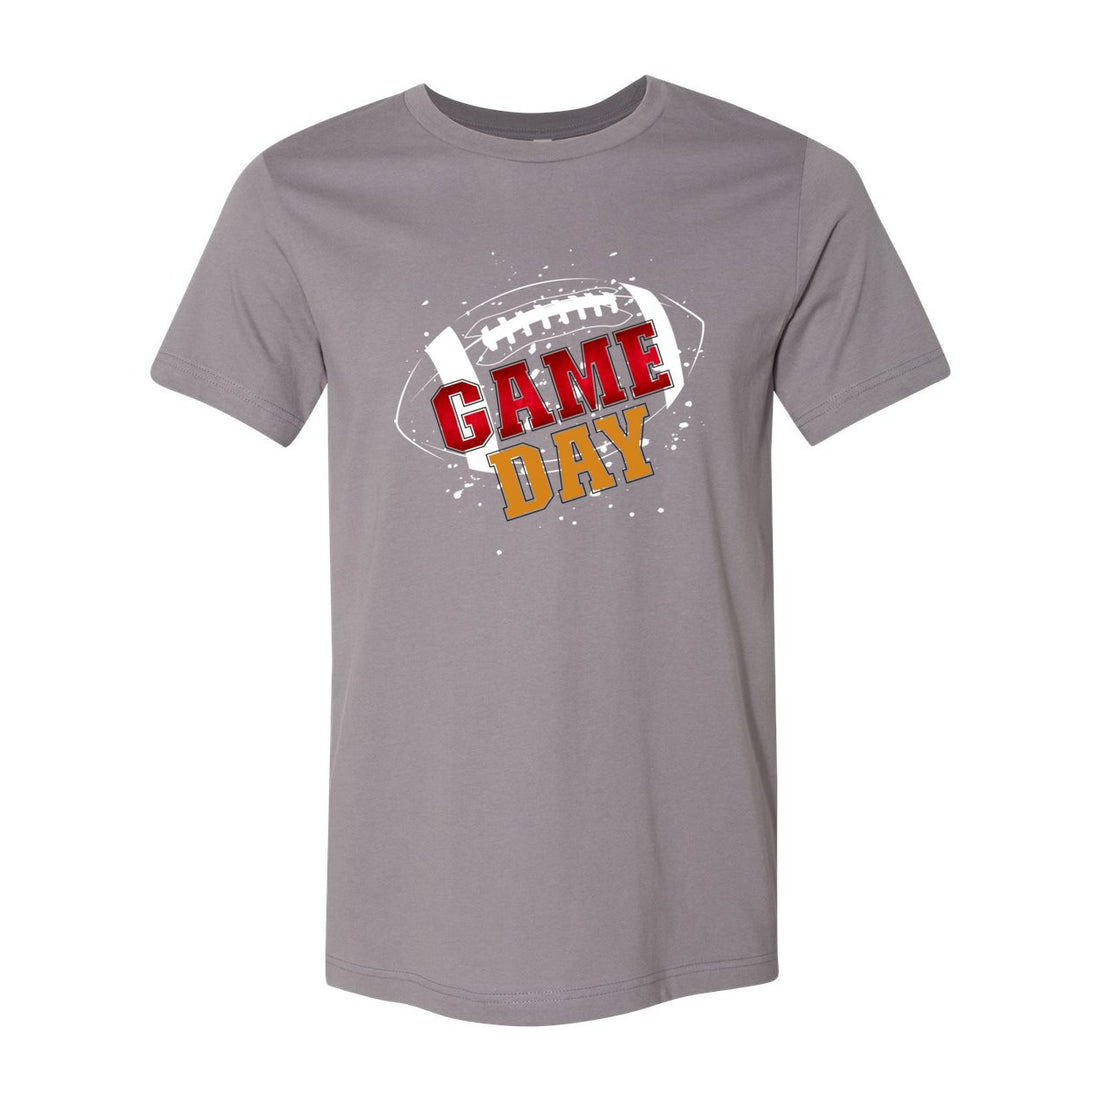 PS Game Day Short Sleeve Jersey Tee - T-Shirts - Positively Sassy - PS Game Day Short Sleeve Jersey Tee